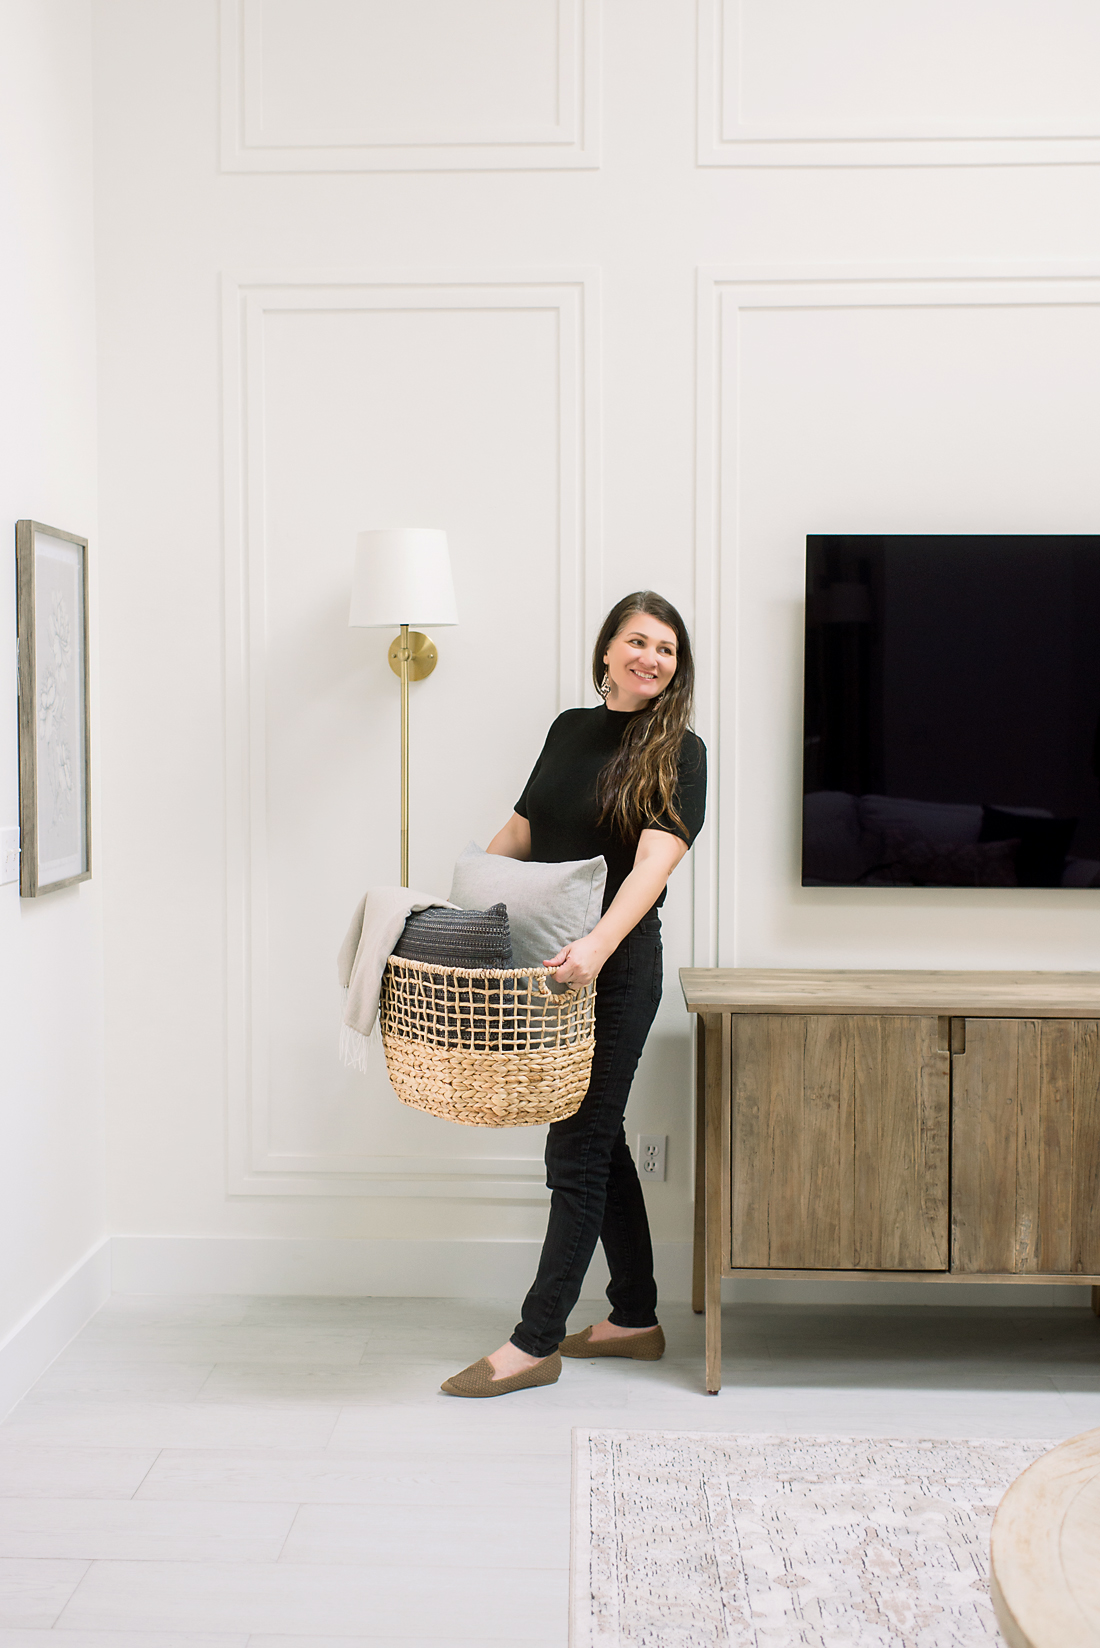 Interiro Designer holding an accessory basket to place in client's home